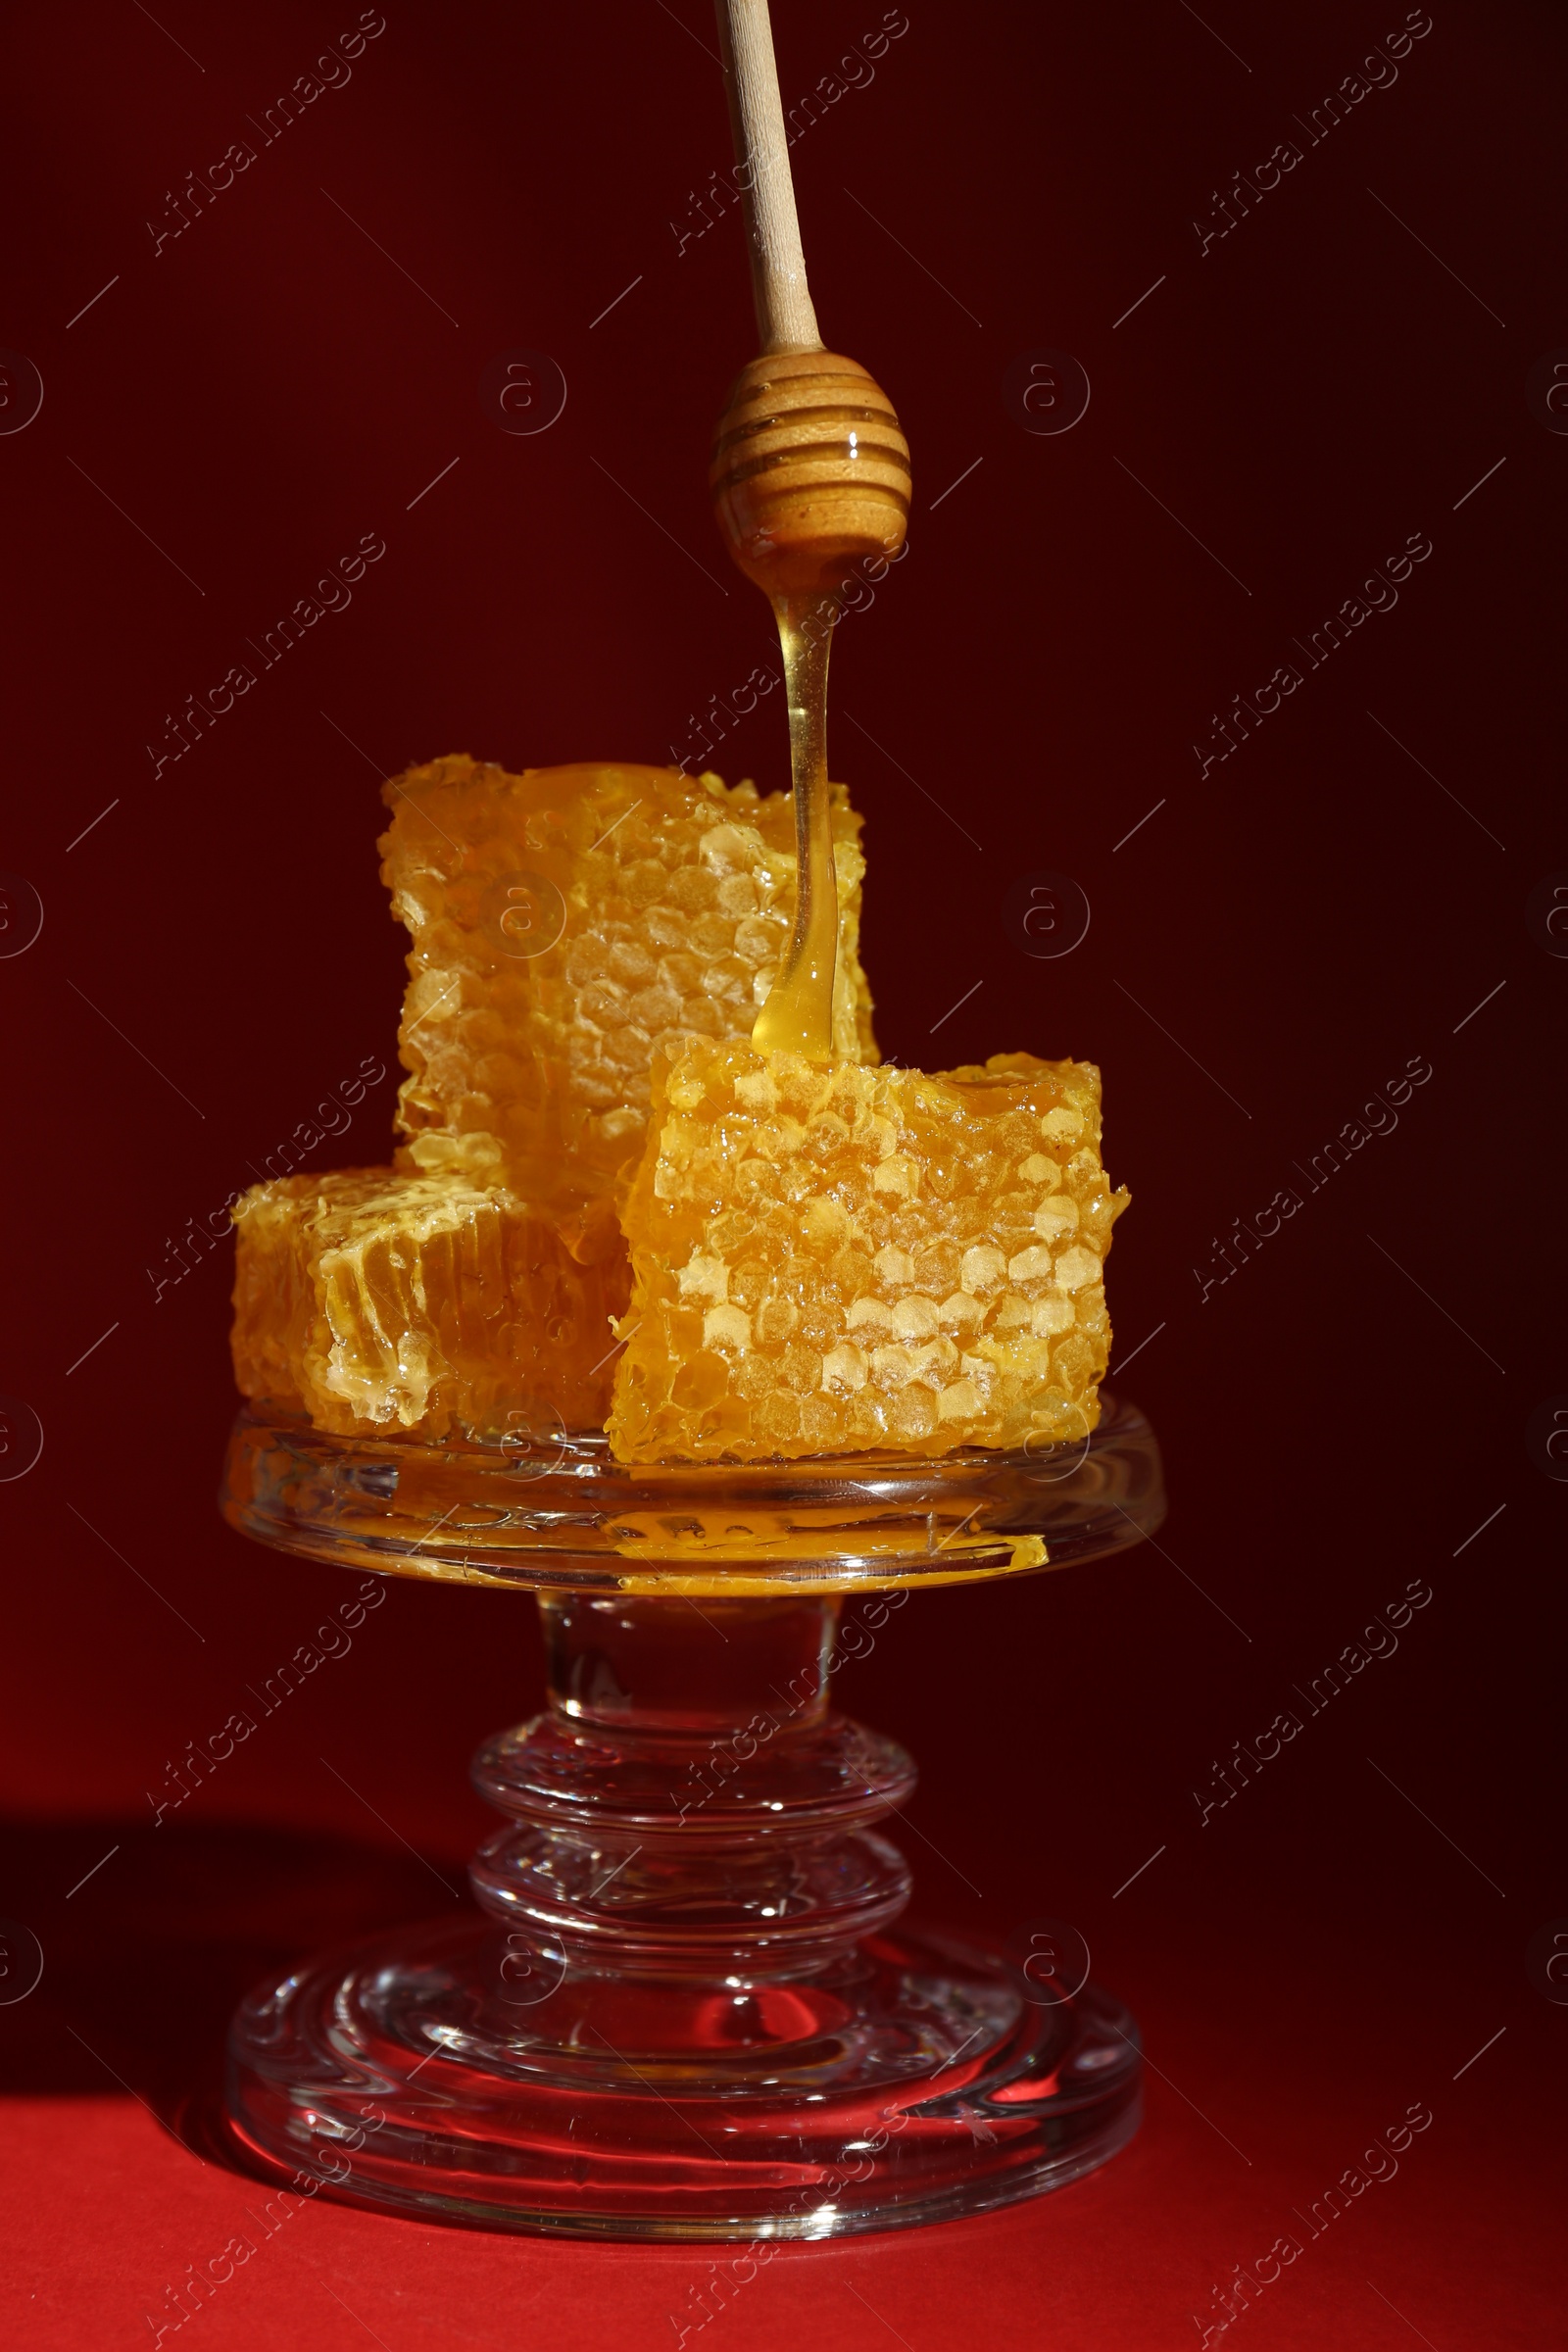 Photo of Dripping tasty honey from dipper onto honeycombs on glass stand against burgundy background